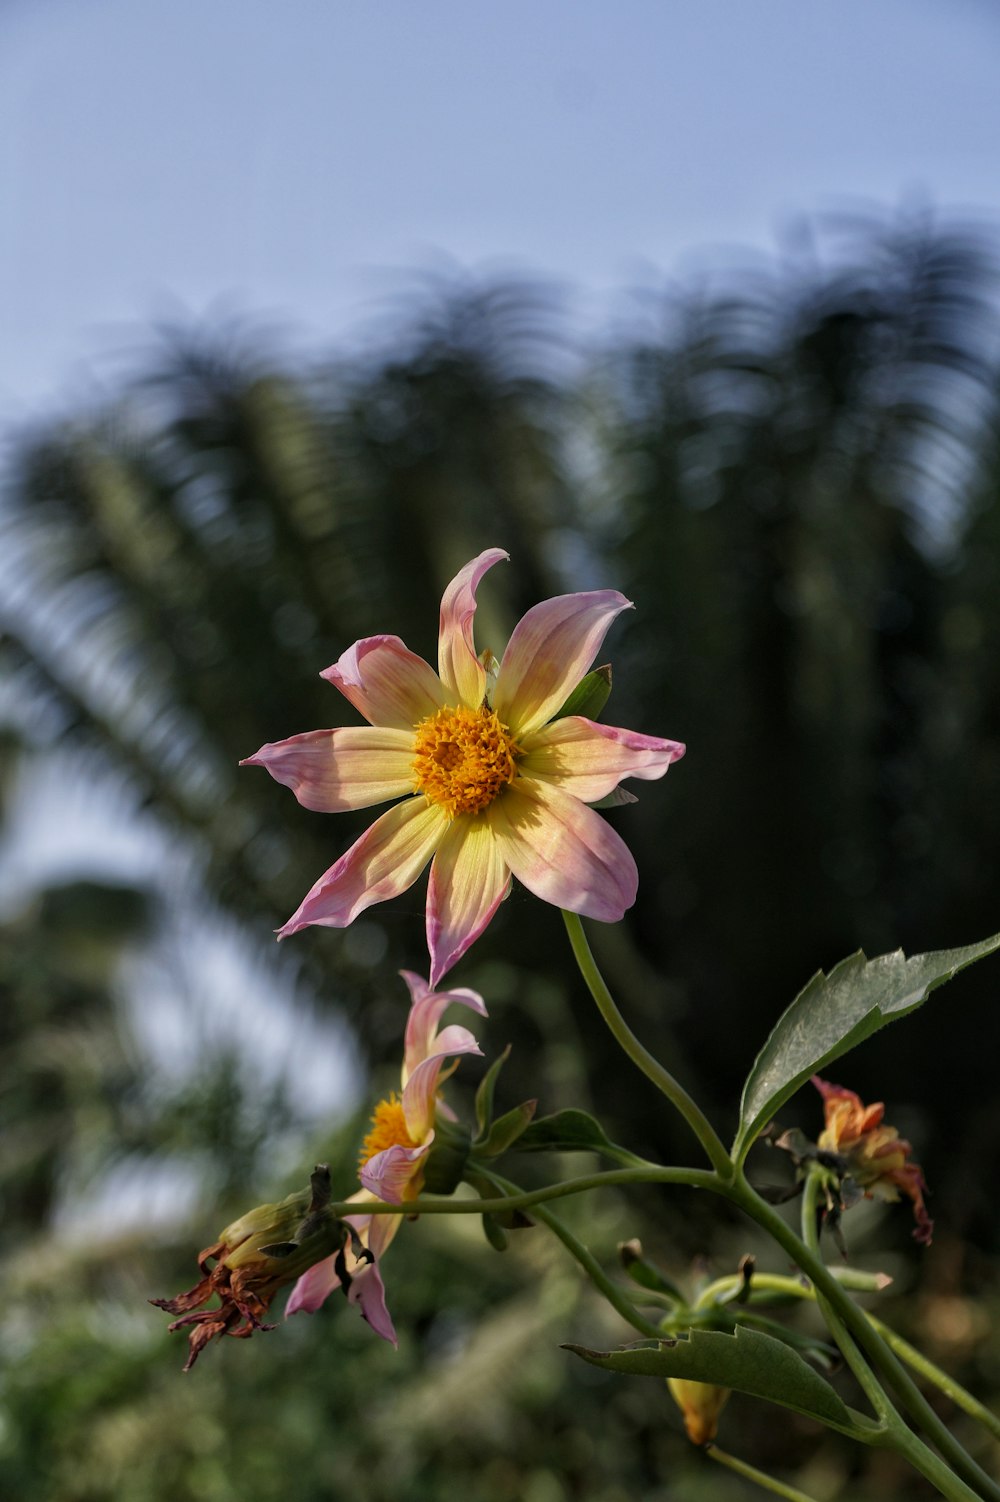 a yellow and pink flower in front of some trees